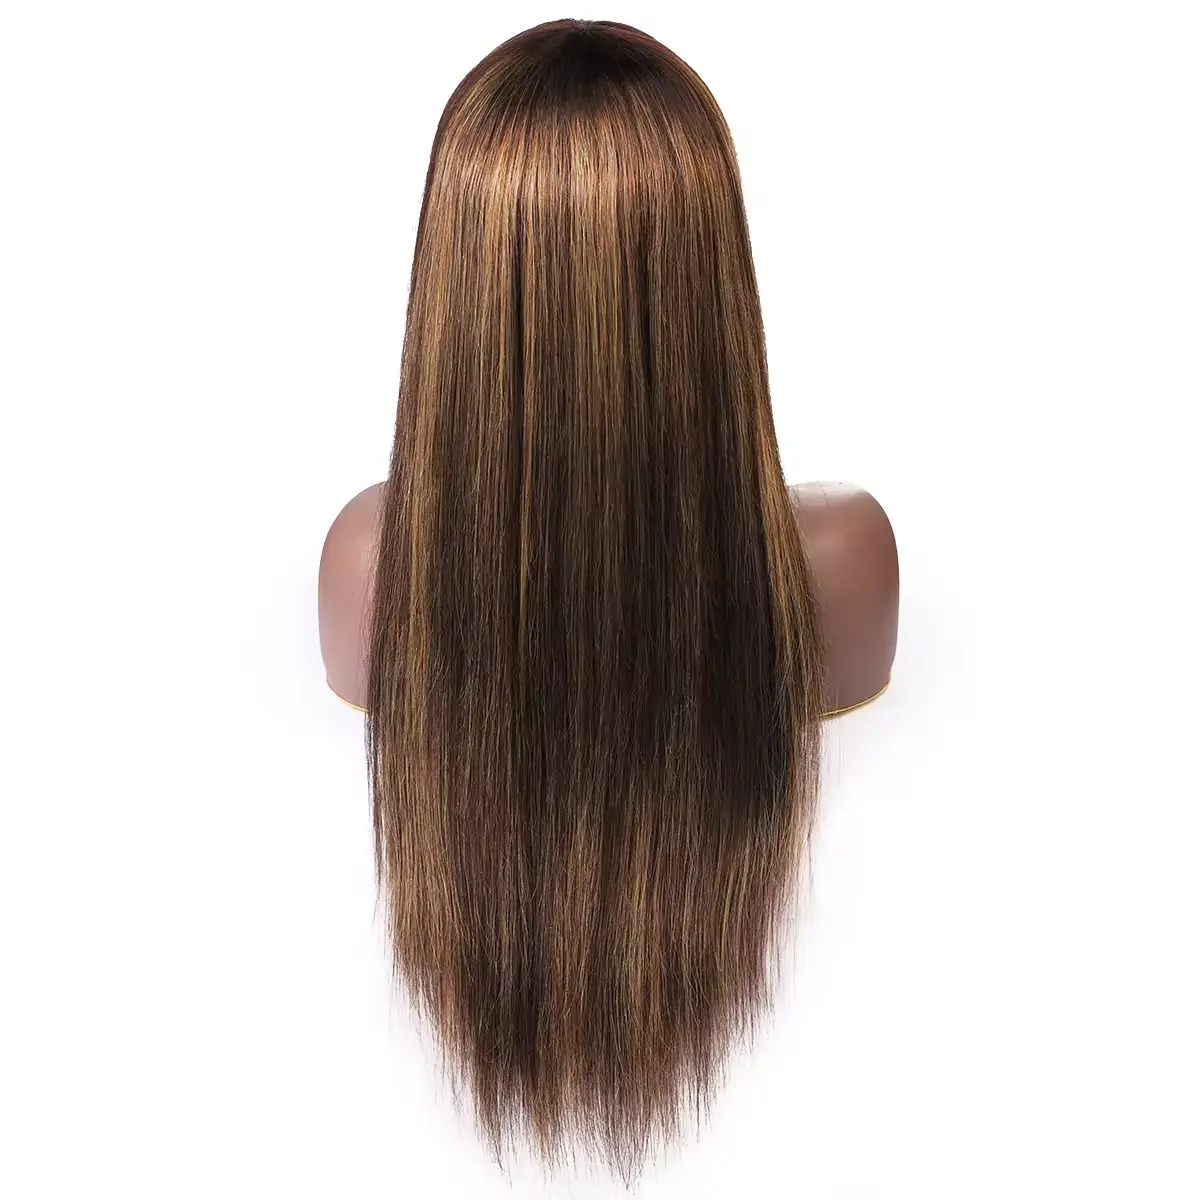 LONGFOR P4/27 Piano Highlight Color Full Bangs Straight High Quality Human Hair Wig Fast Shipping Top Grade TP Fashion Wholesale